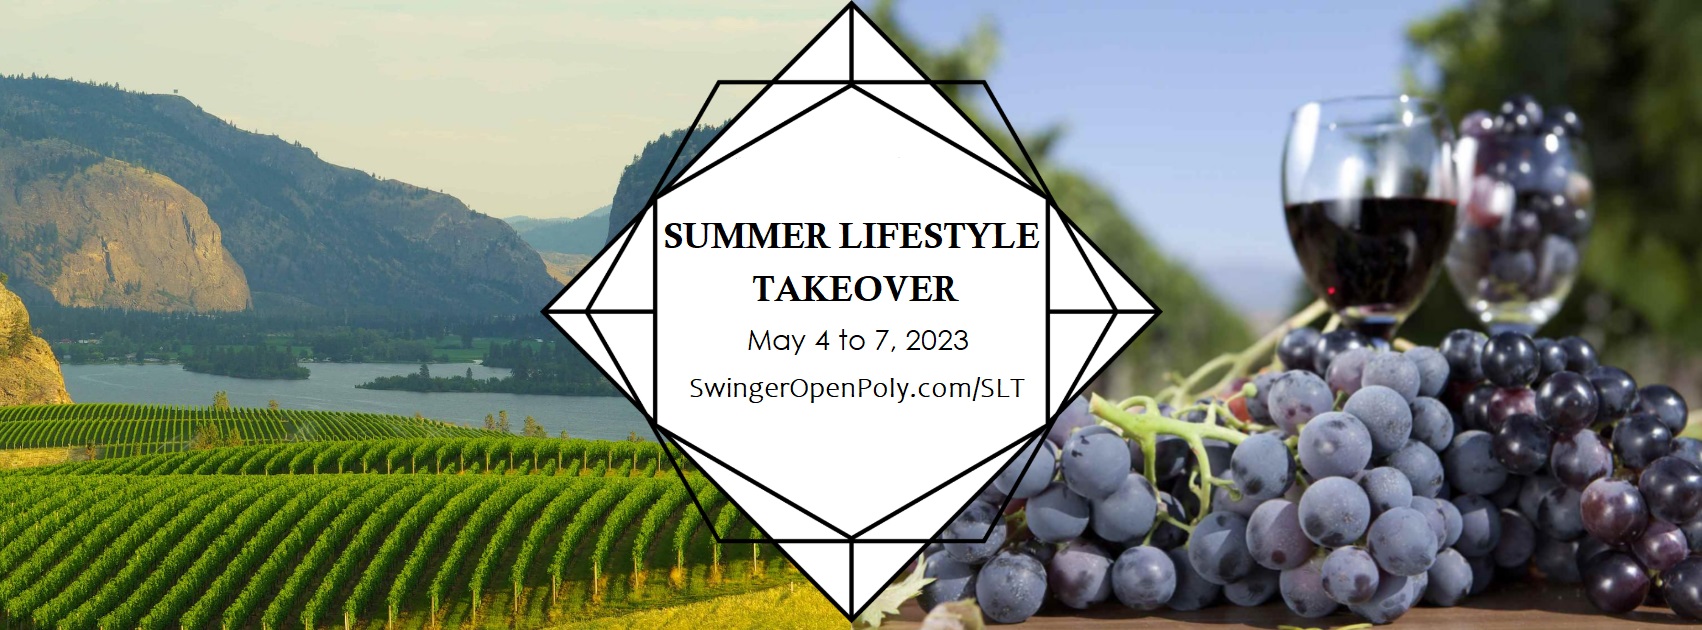 SUMMER LIFESTYLE TAKEOVER